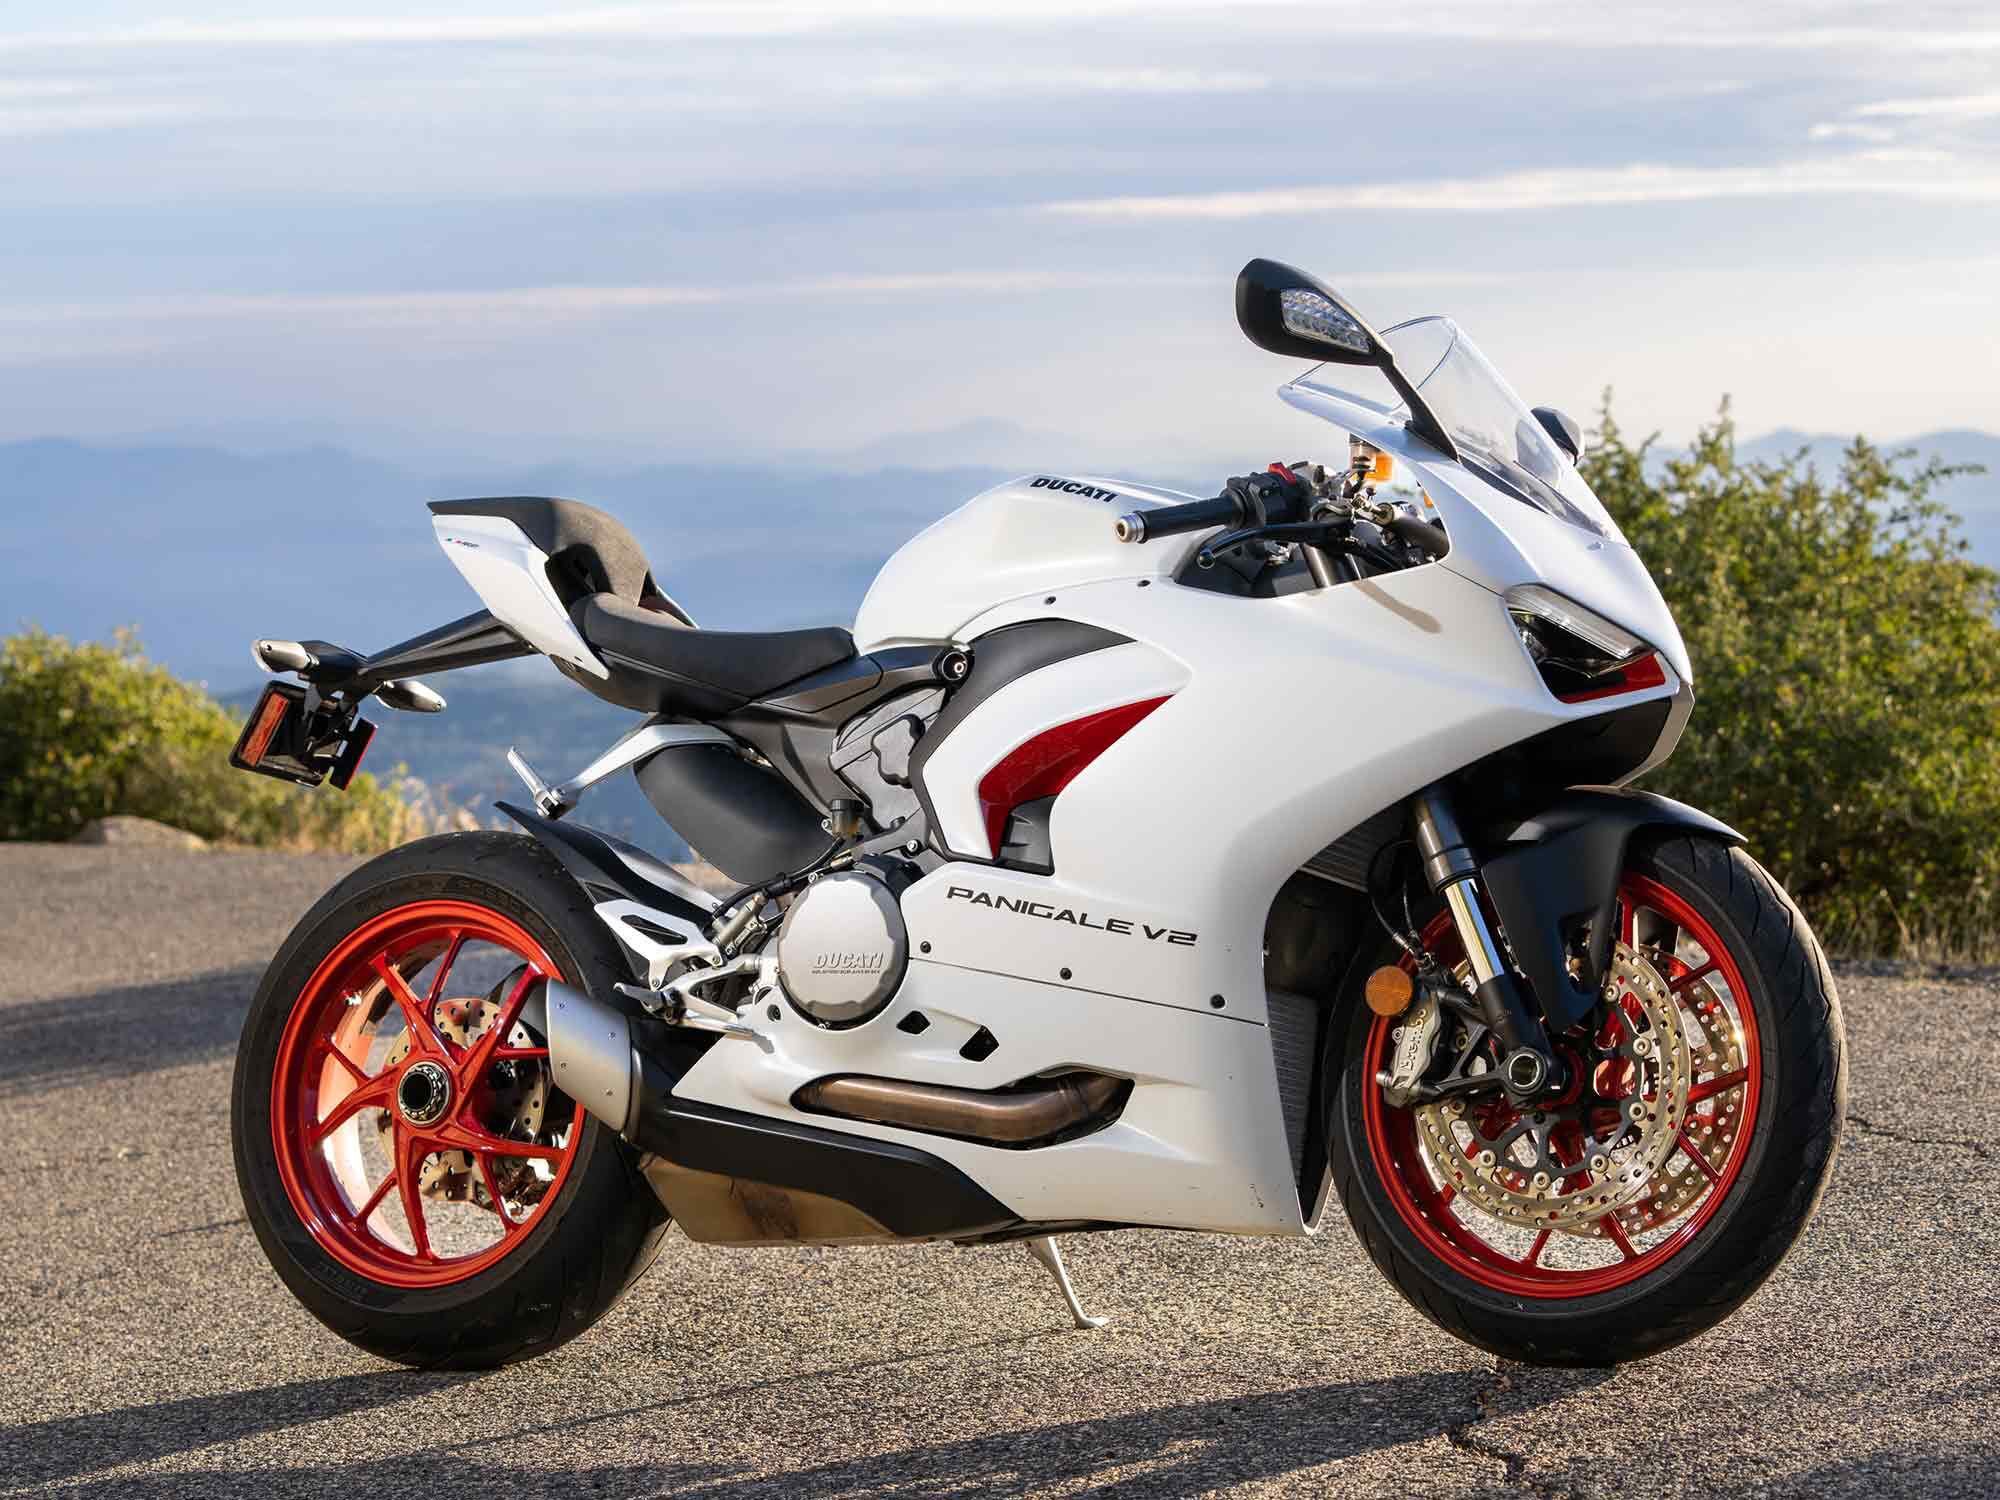 In spite of its updated bodywork and electronics package, the 2022 Panigale V2 isn’t that much different from the original Panigale 899.